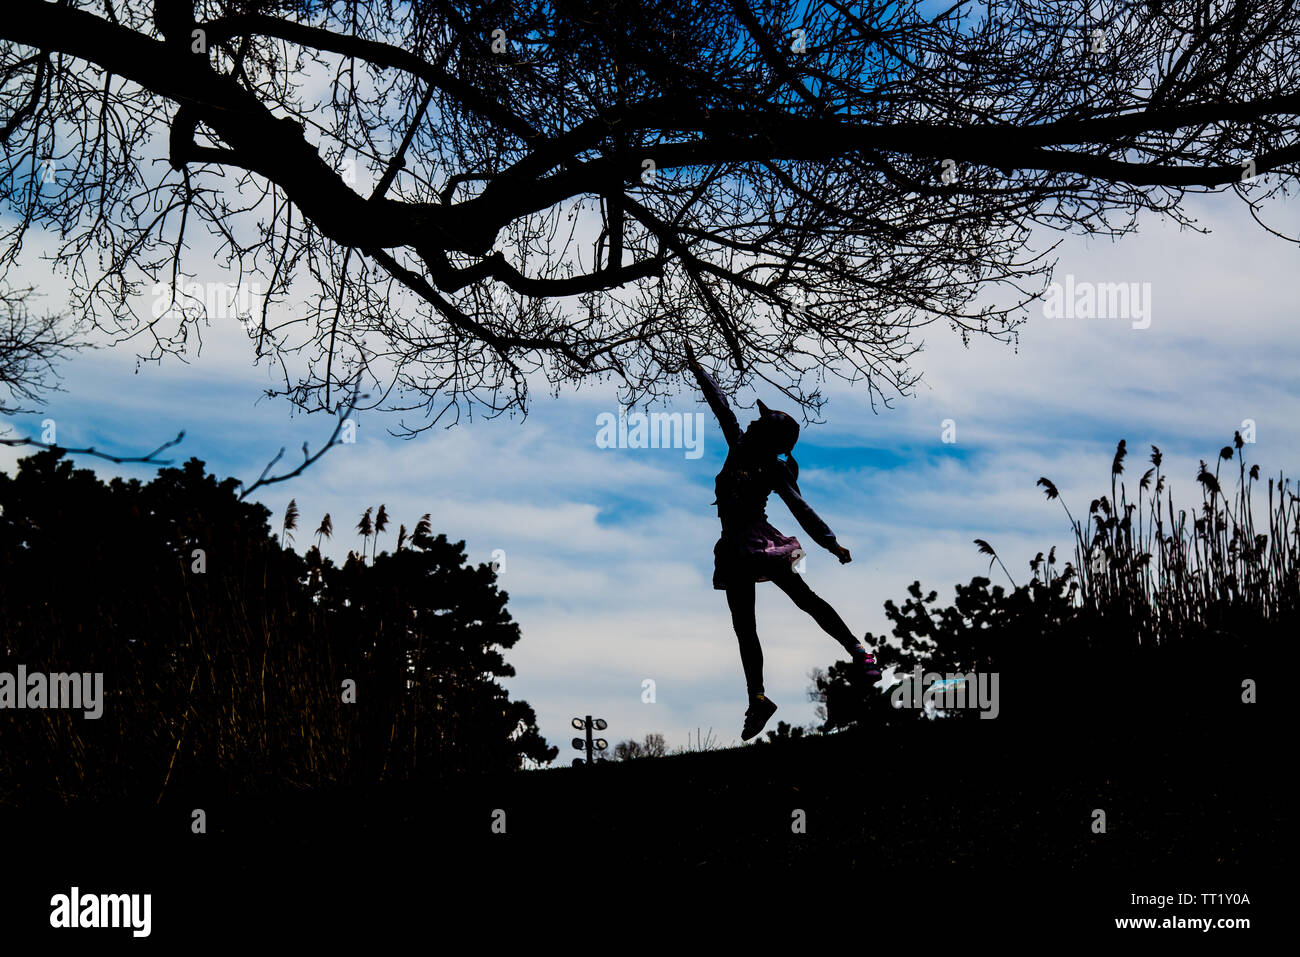 A jumping girl silhouette under the tree Stock Photo